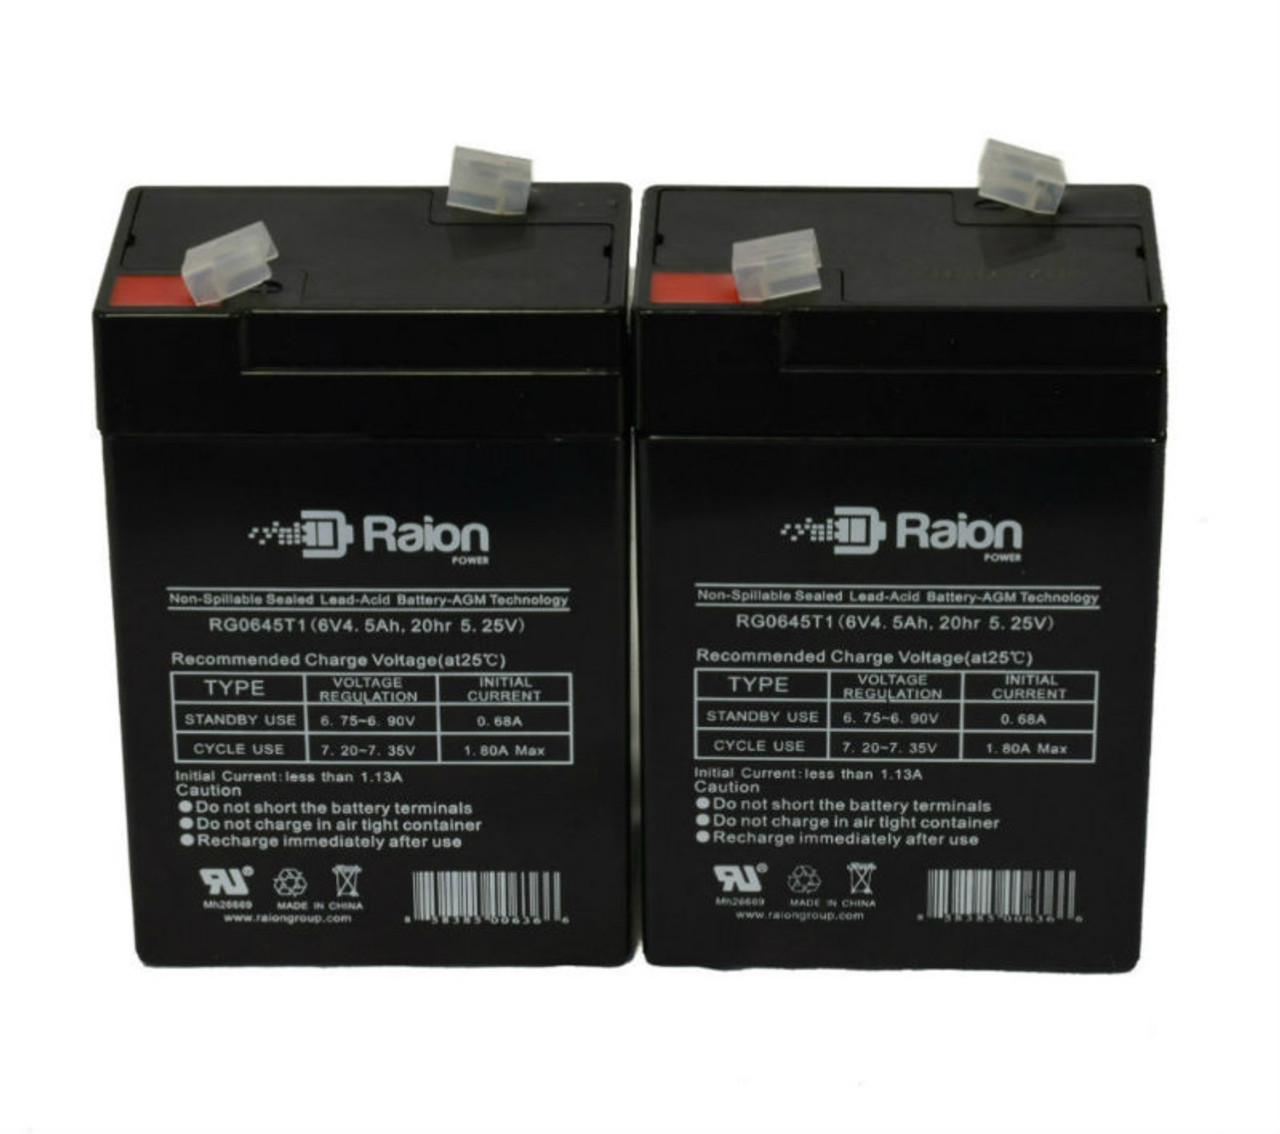 Raion Power RG0645T1 6V 4.5Ah Replacement Medical Equipment Battery for Ladd Steritak J3000 Inter Cranial Pressure - 2 Pack